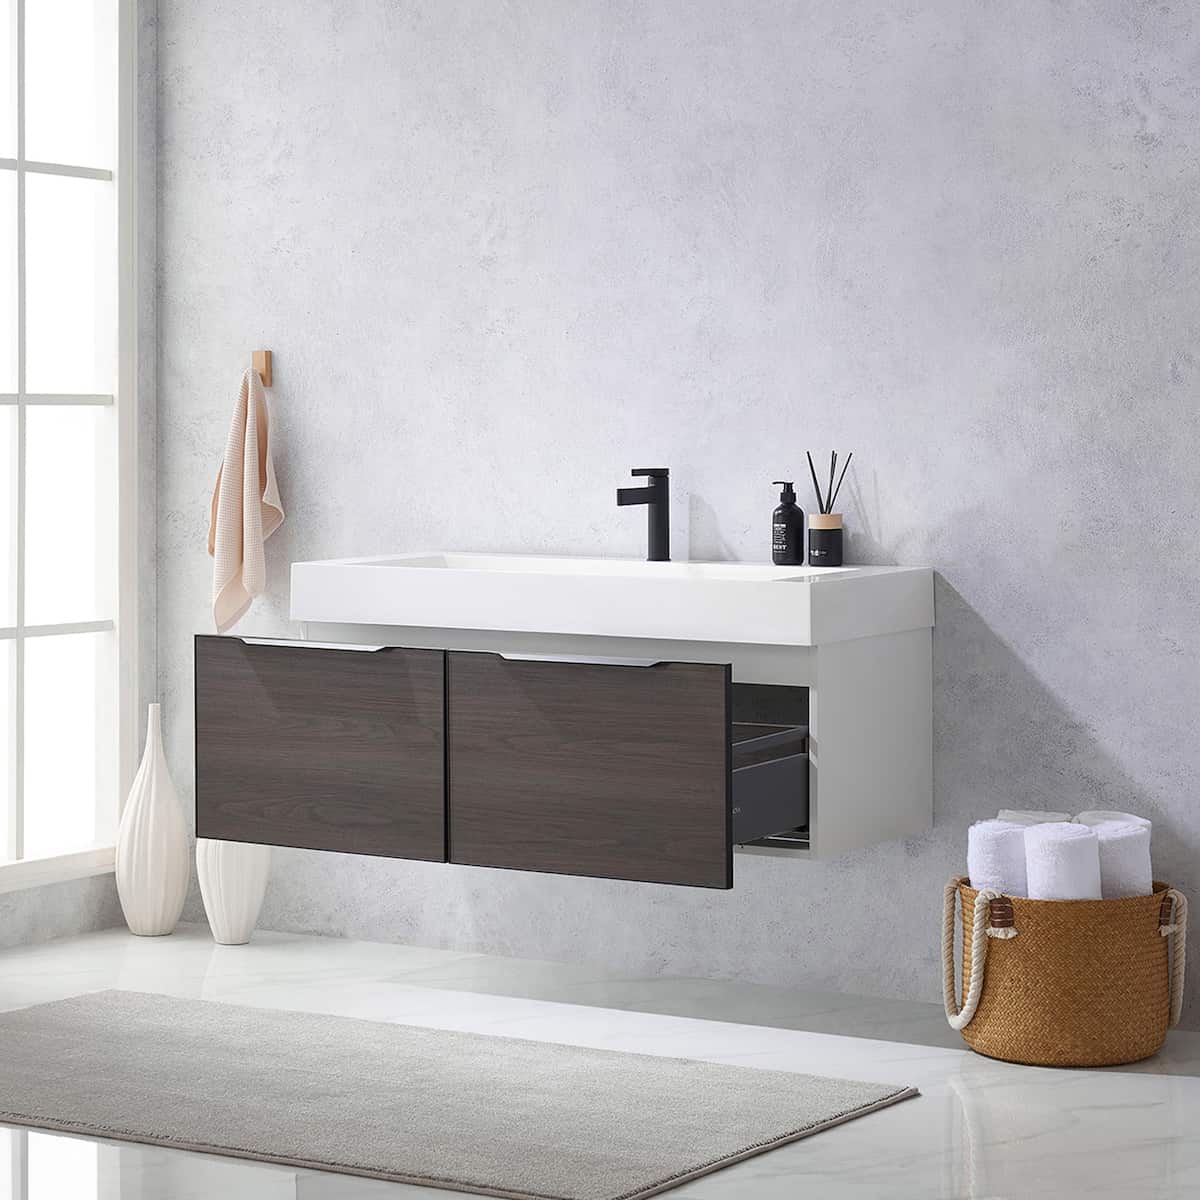 Vinnova Vegadeo 48 Inch Wall Mount Single Sink Bath Vanity in Suleiman Oak Finish with White One-Piece Composite Stone Sink Top Without Mirror Drawers 703448-SO-WH-NM